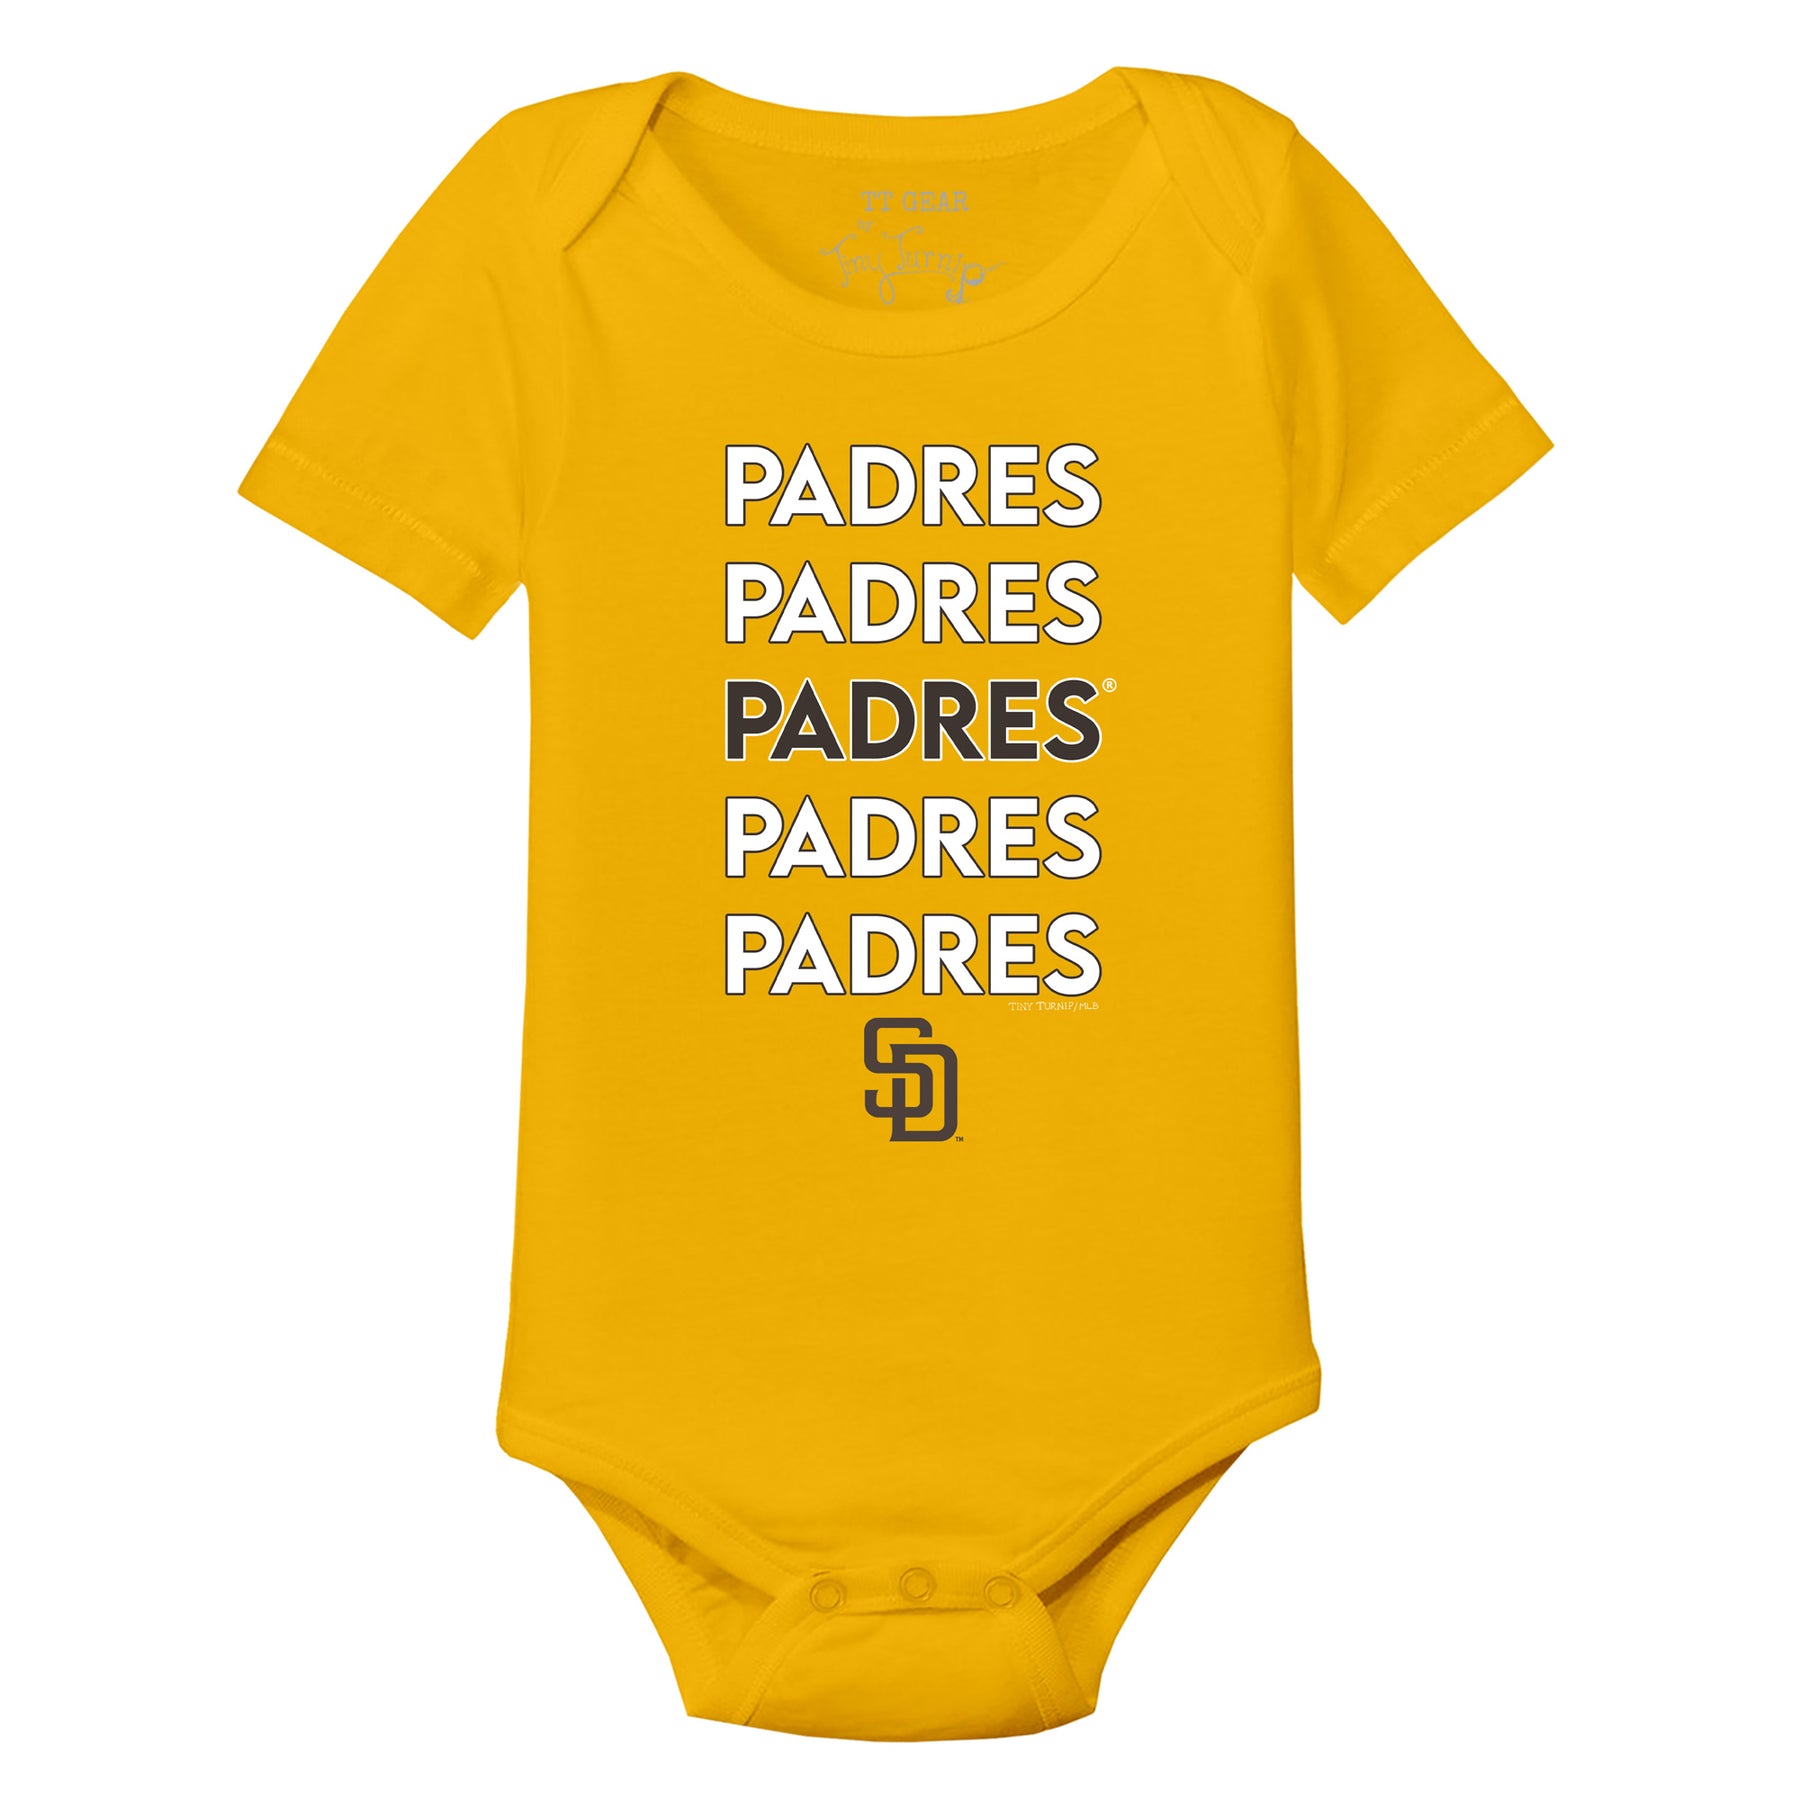 San Diego Padres Stacked Short Sleeve Snapper